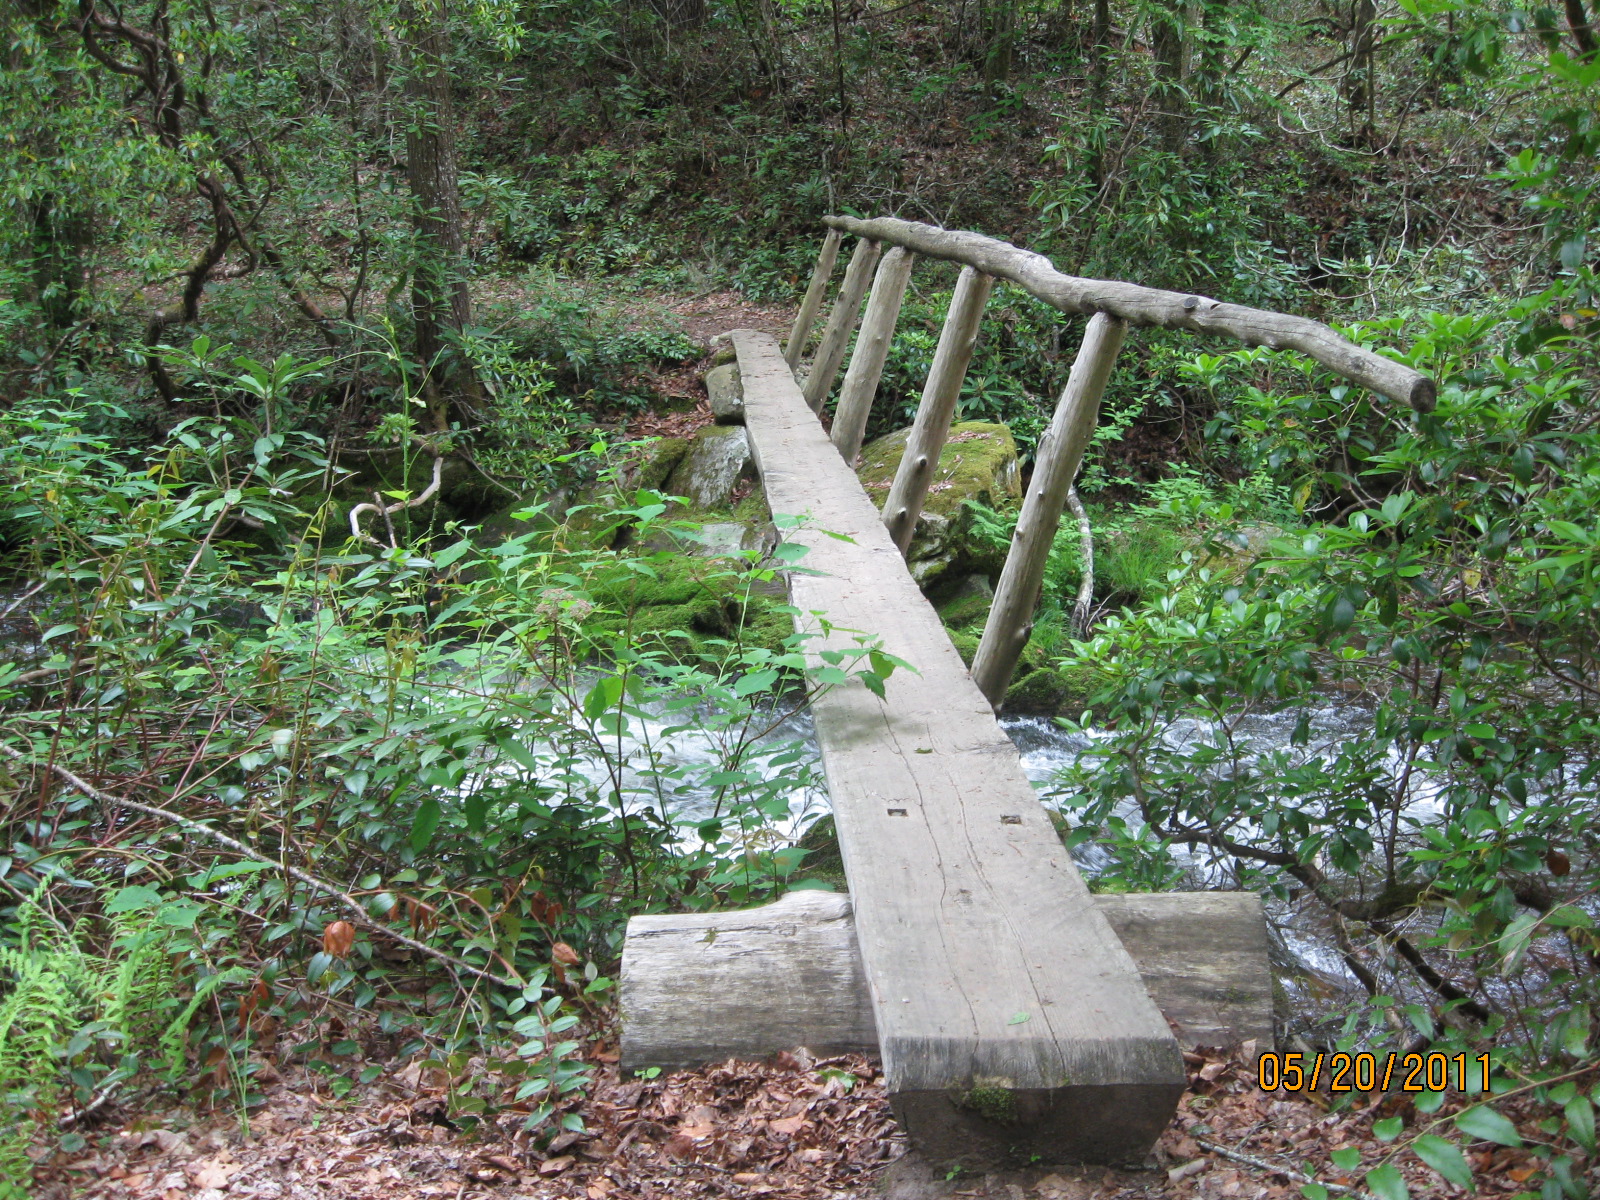 Caldwell Fork Trail, an other typical stream crossing